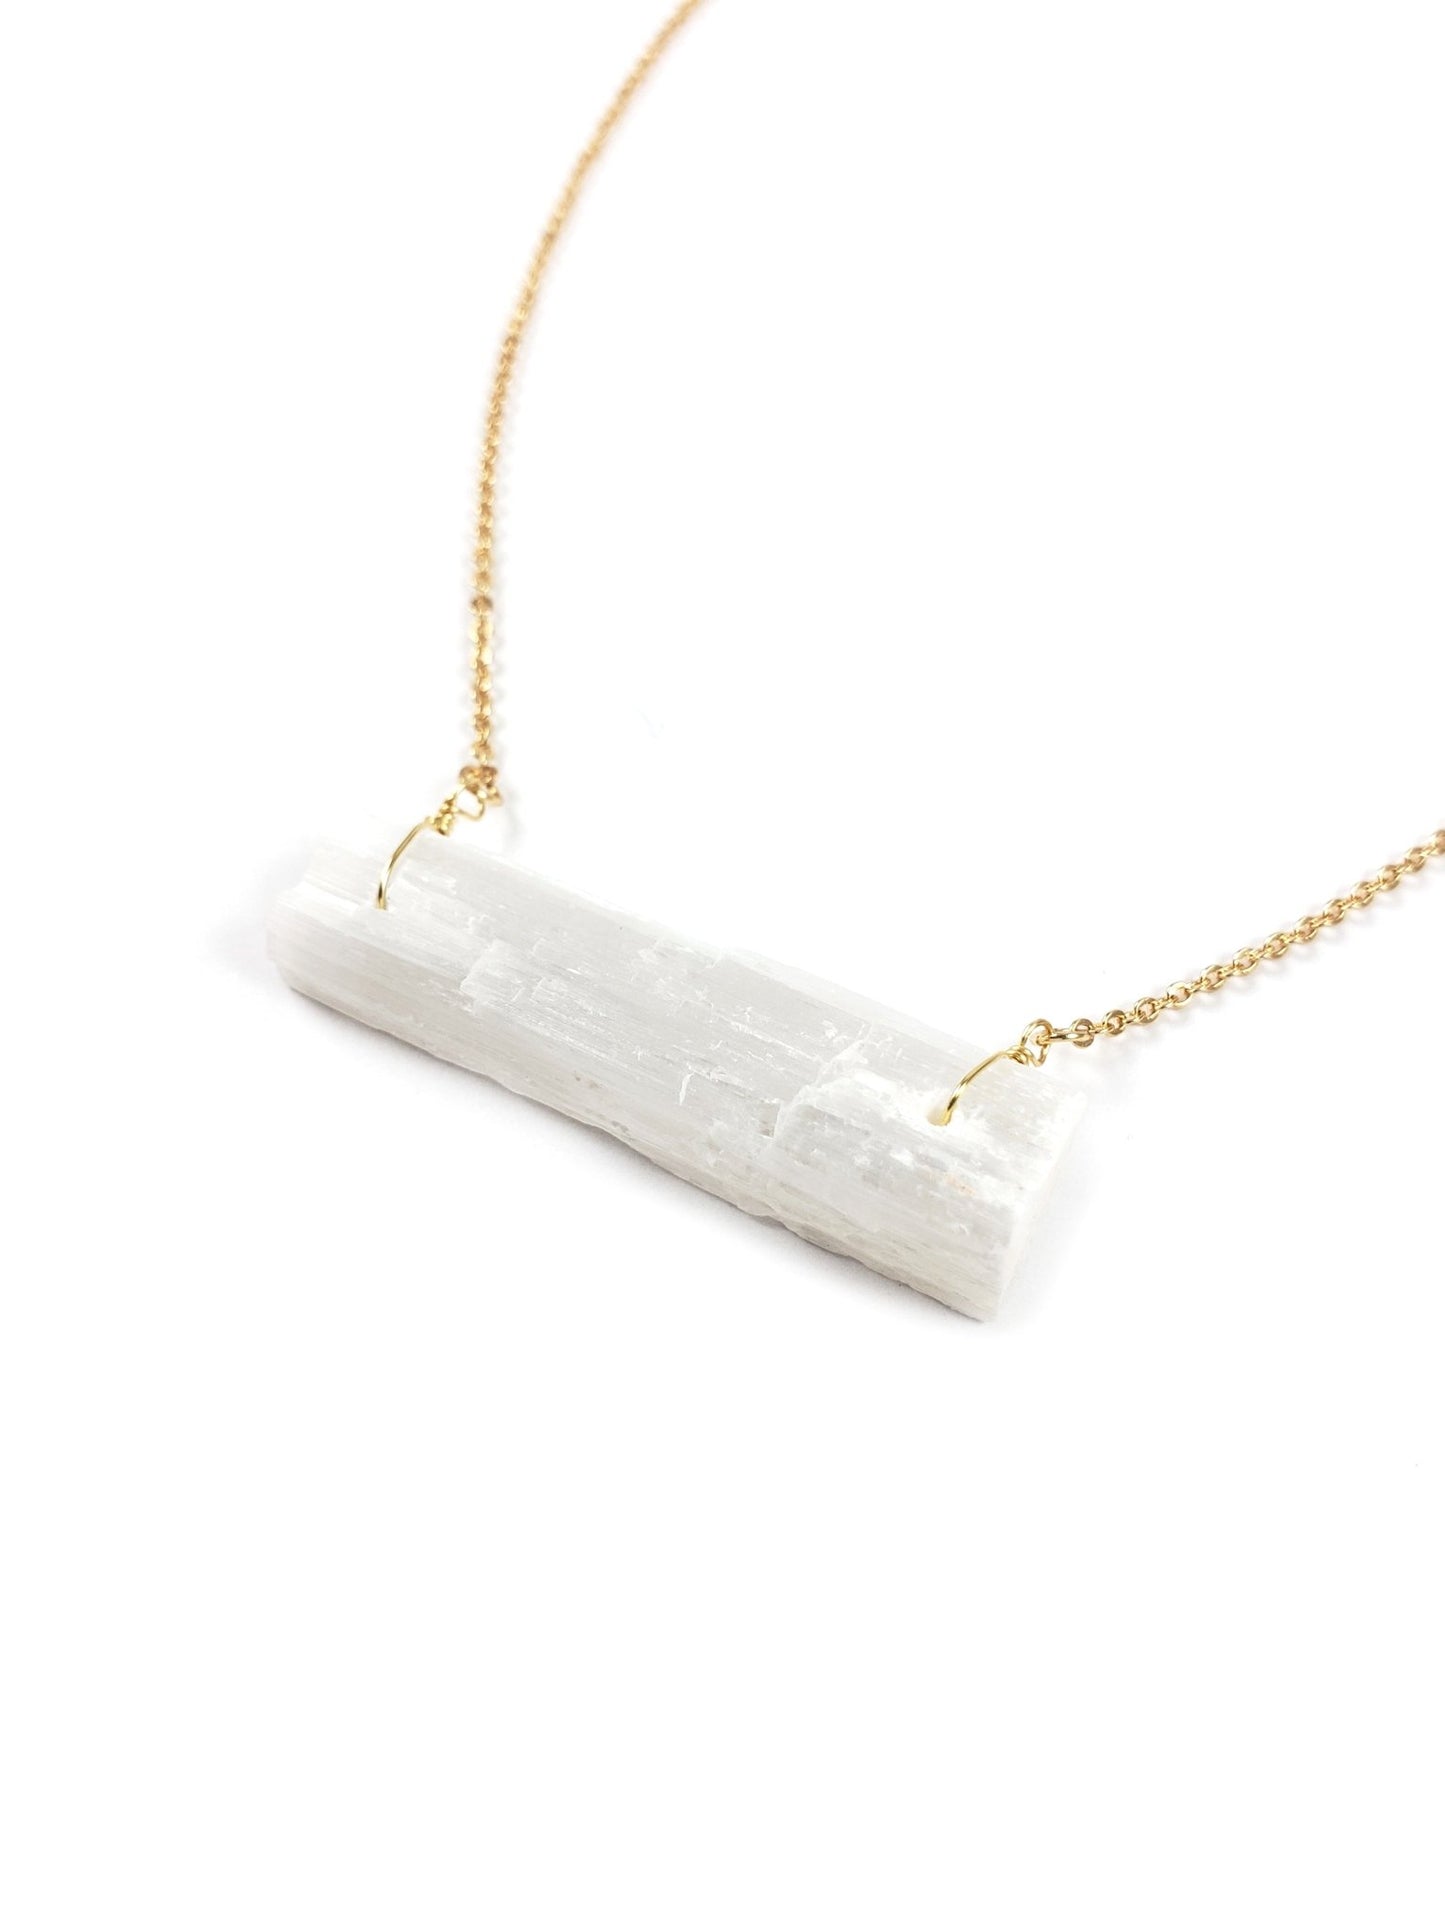 Selenite Necklace - Ariana Ost